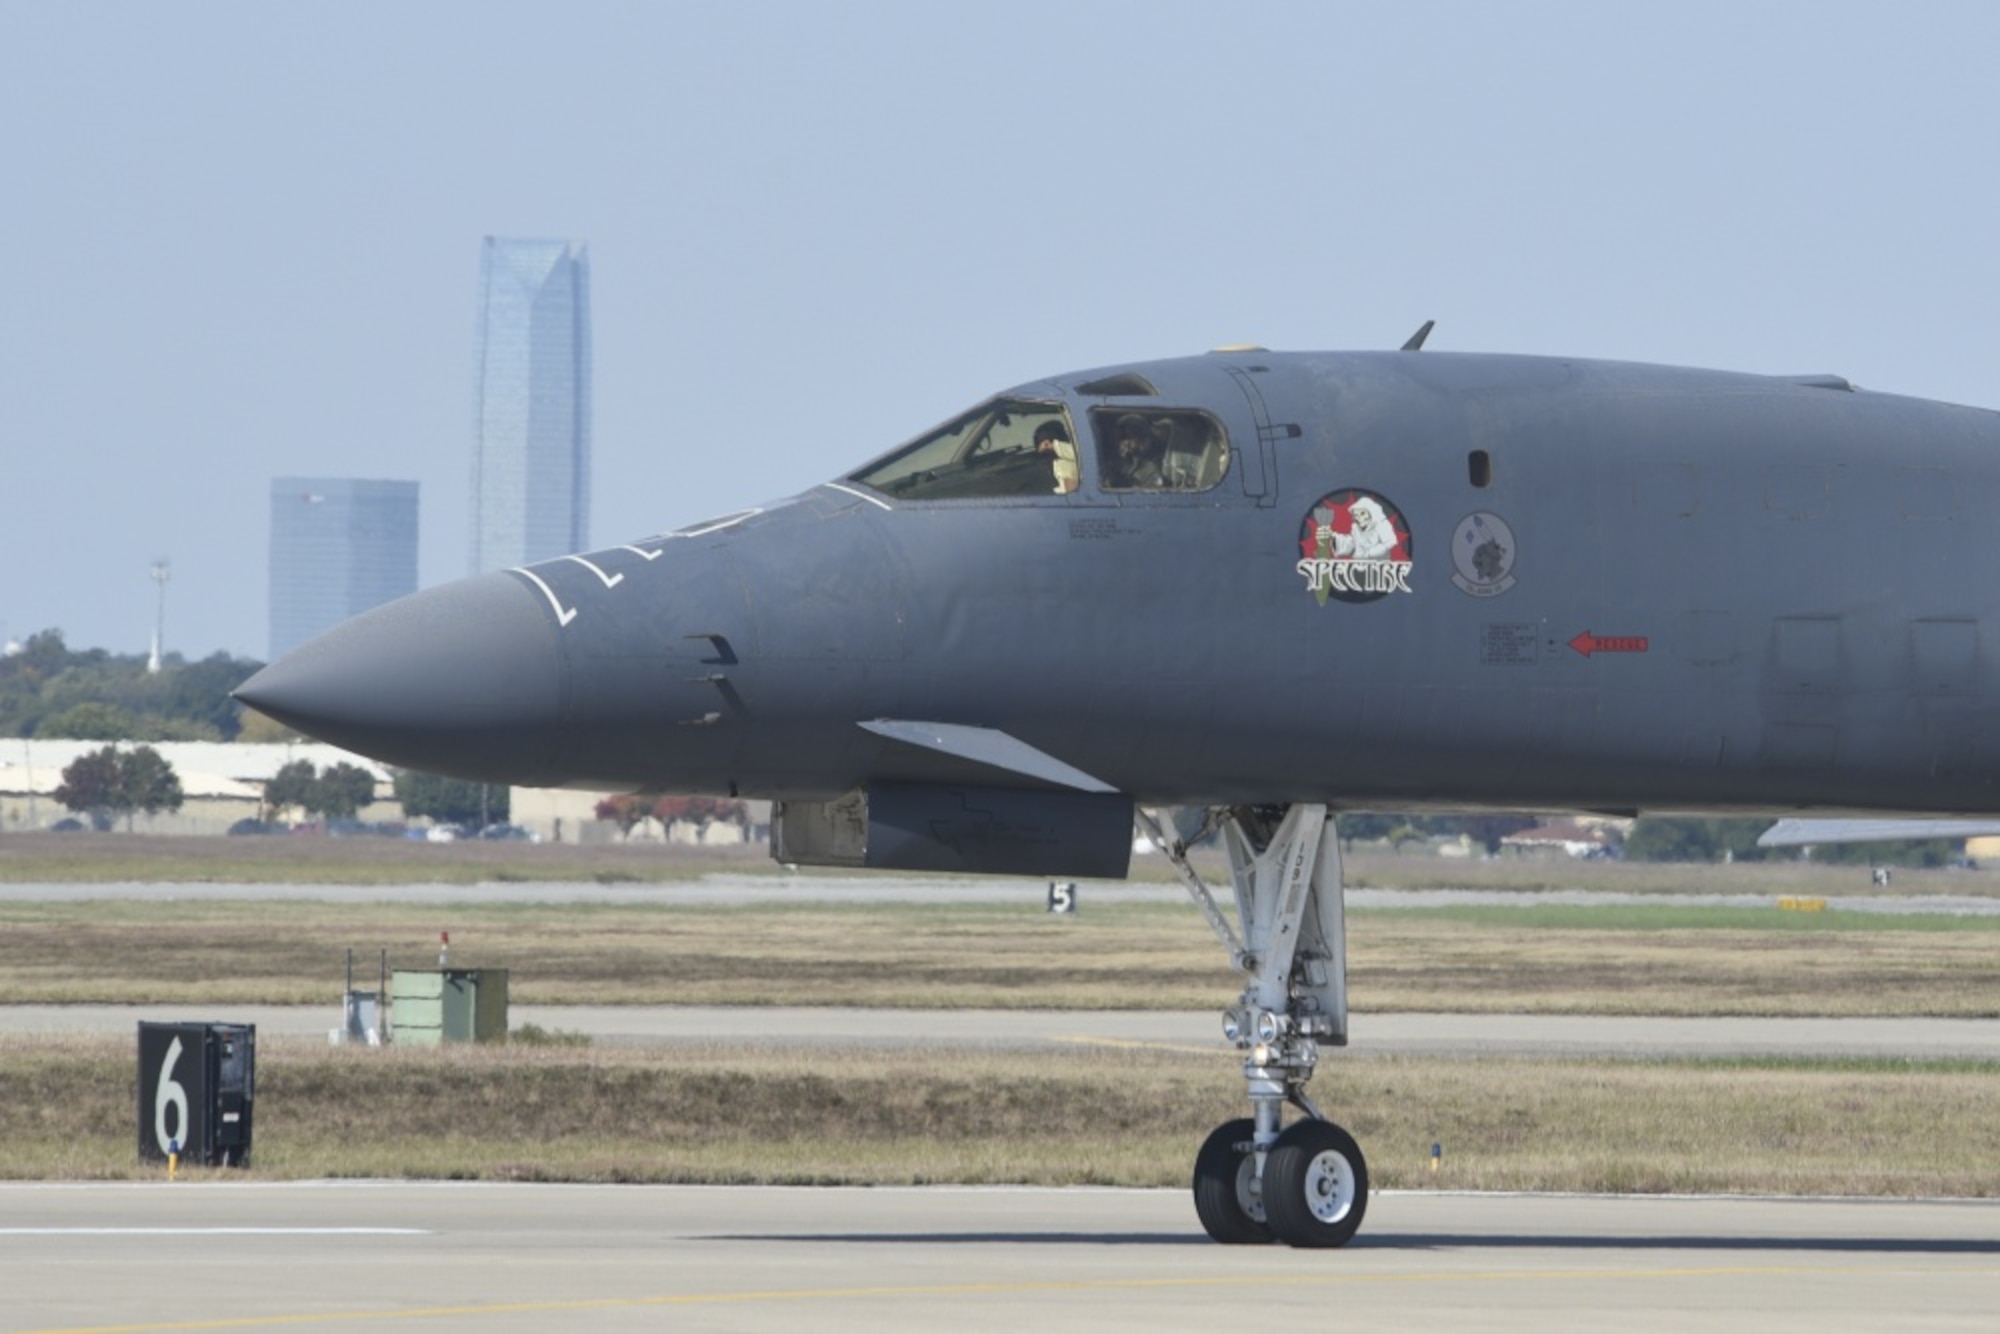 B-1B Lancer, 86-0109, 'Spectre' taxis at Tinker Air Force Base, Oklahoma, Oct. 26, 2018, with parts of the Oklahoma City skyline visible in the background. The jet was ferried from Midland International Air and Space Port to Tinker where it will undergo depot-level maintenance and upgrades with the Oklahoma City Air Logistics Complex today. During a routine training flight May 1, the Dyess AFB based B-1B had an in-flight emergency resulting in an attempted ejection. The first crewmembers’ seat failed to deploy and the aircraft commander halted the ejection sequence and heroically saved the aircraft and crew by landing at Midland International Air & Space Port.